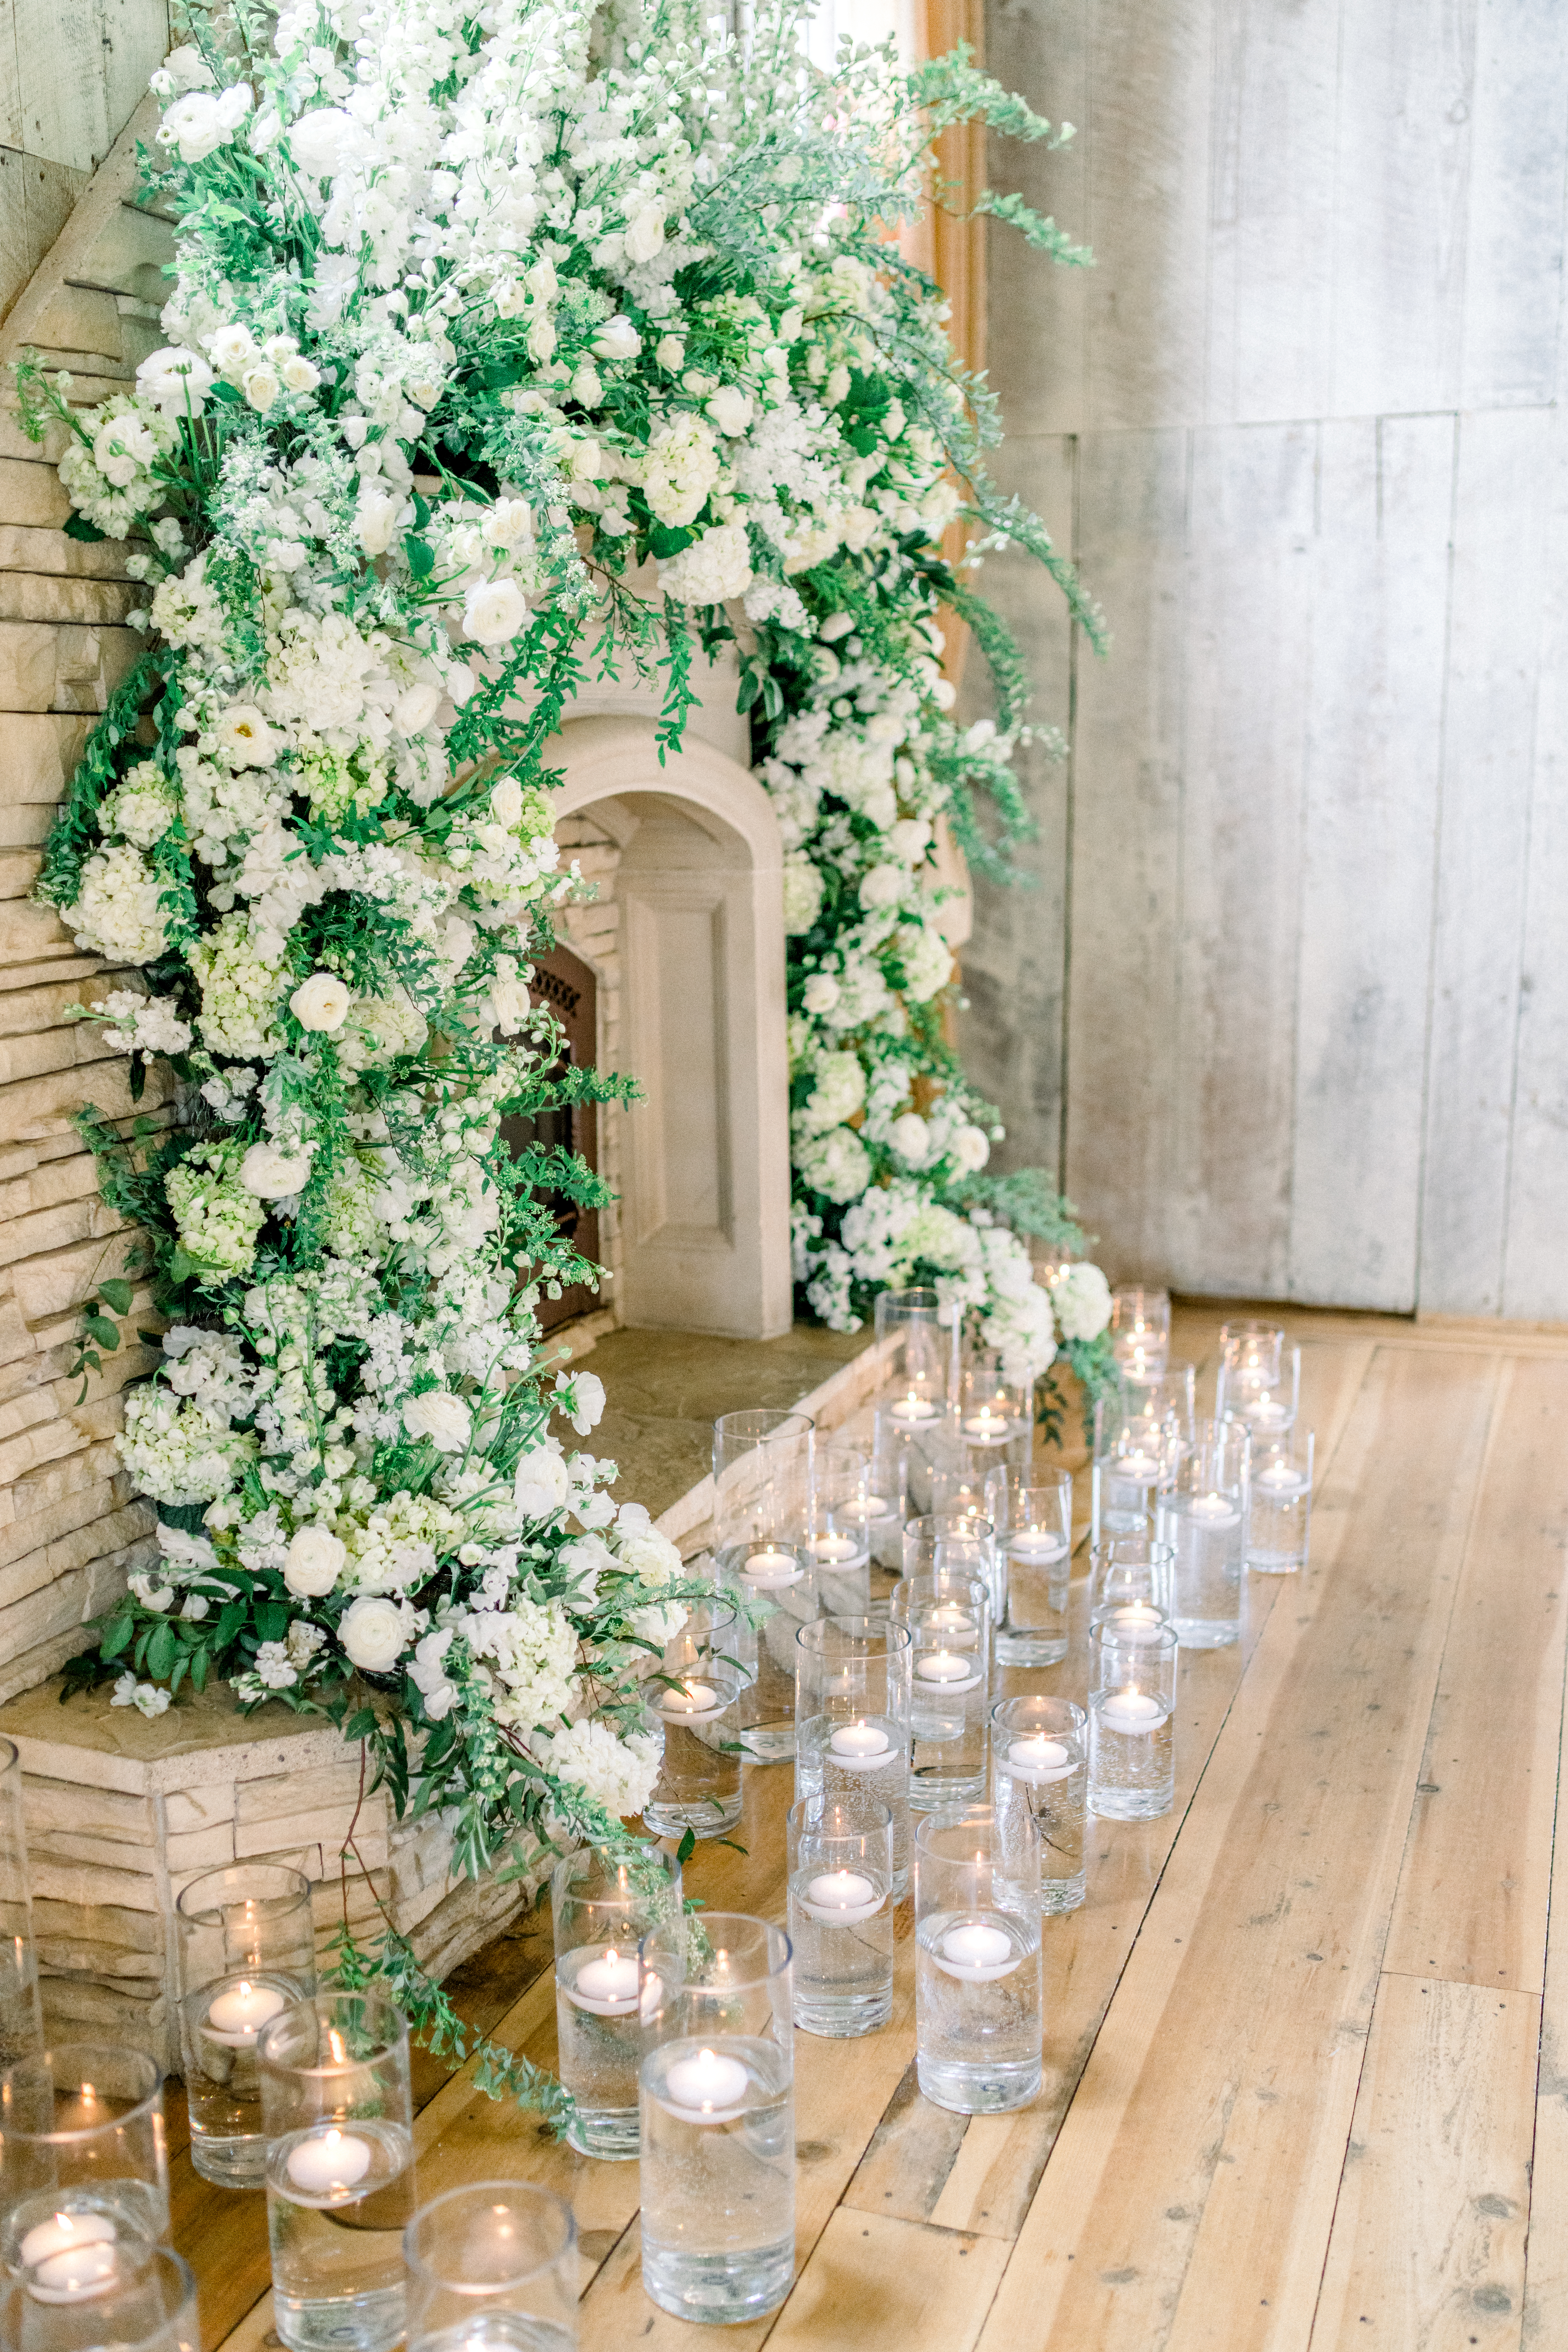 California wedding alter with white florals